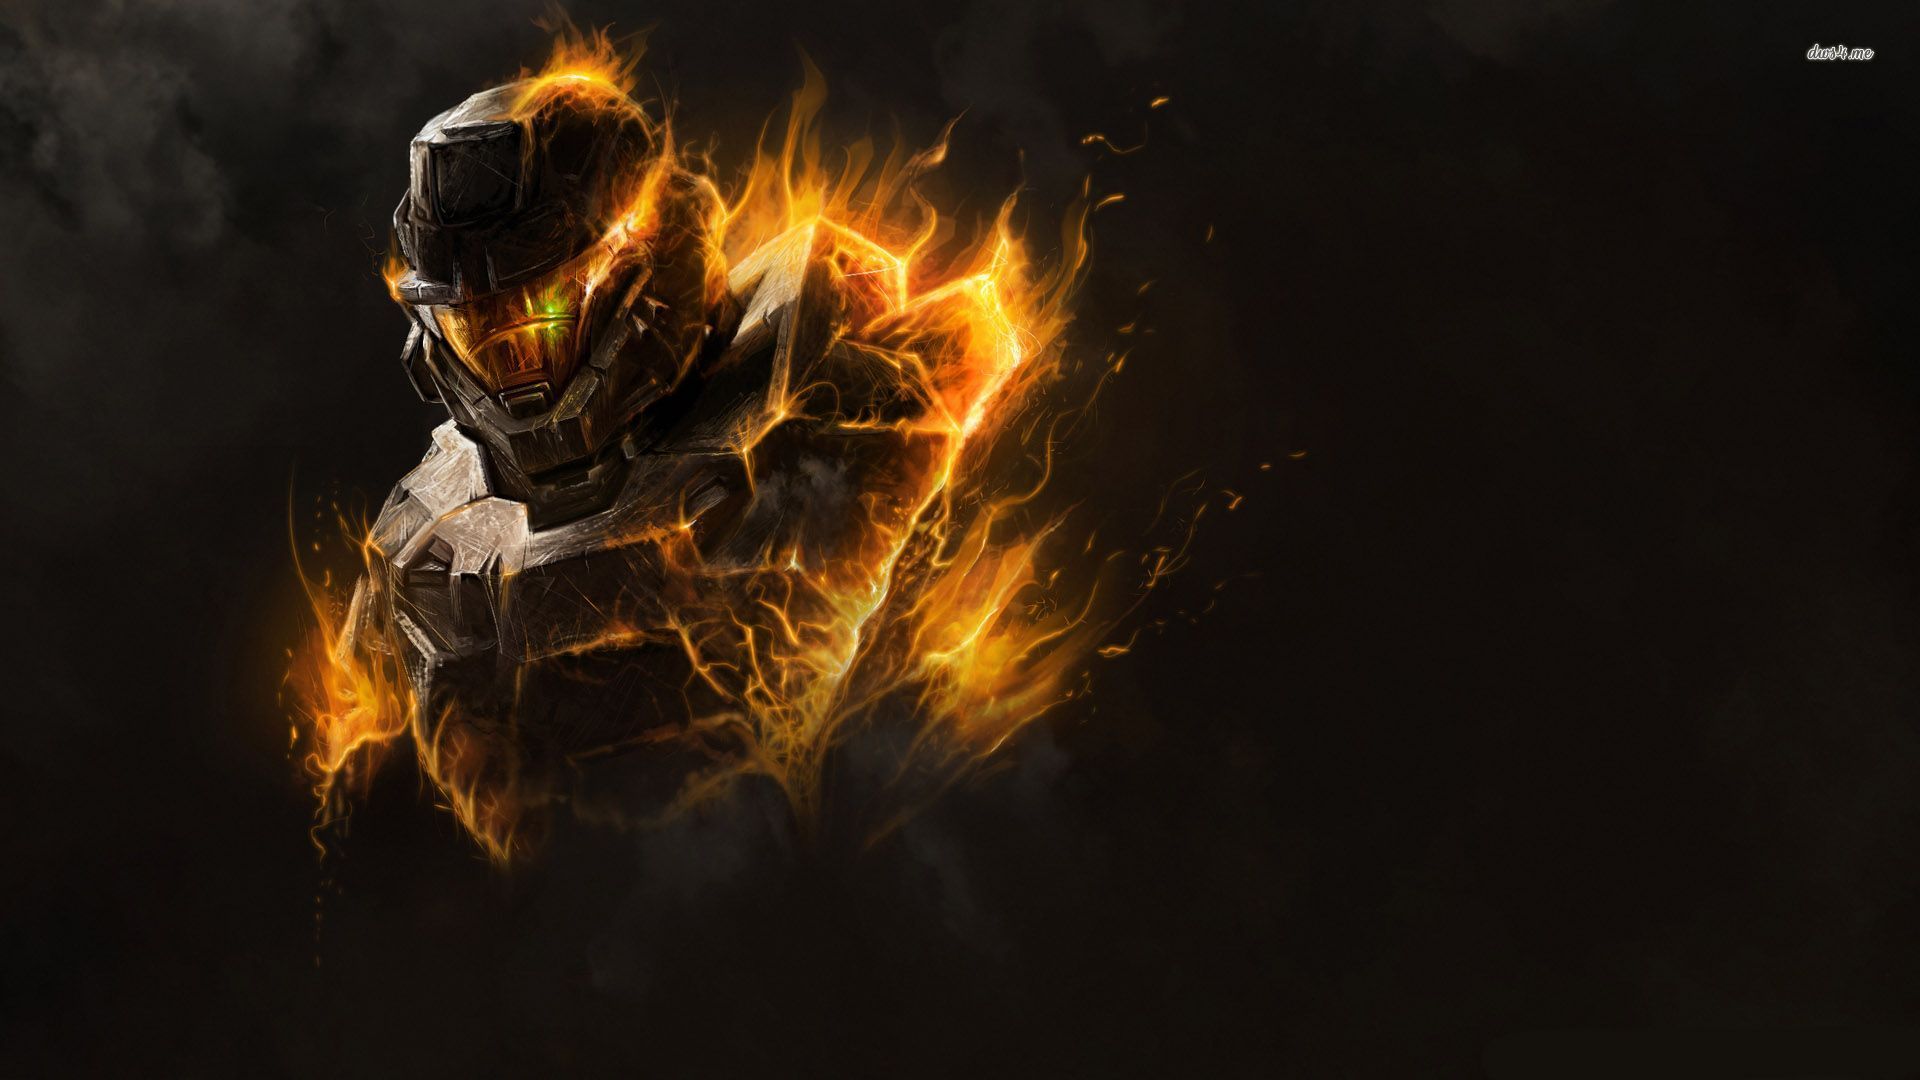 halo wallpaper,flame,fire,cg artwork,darkness,fictional character